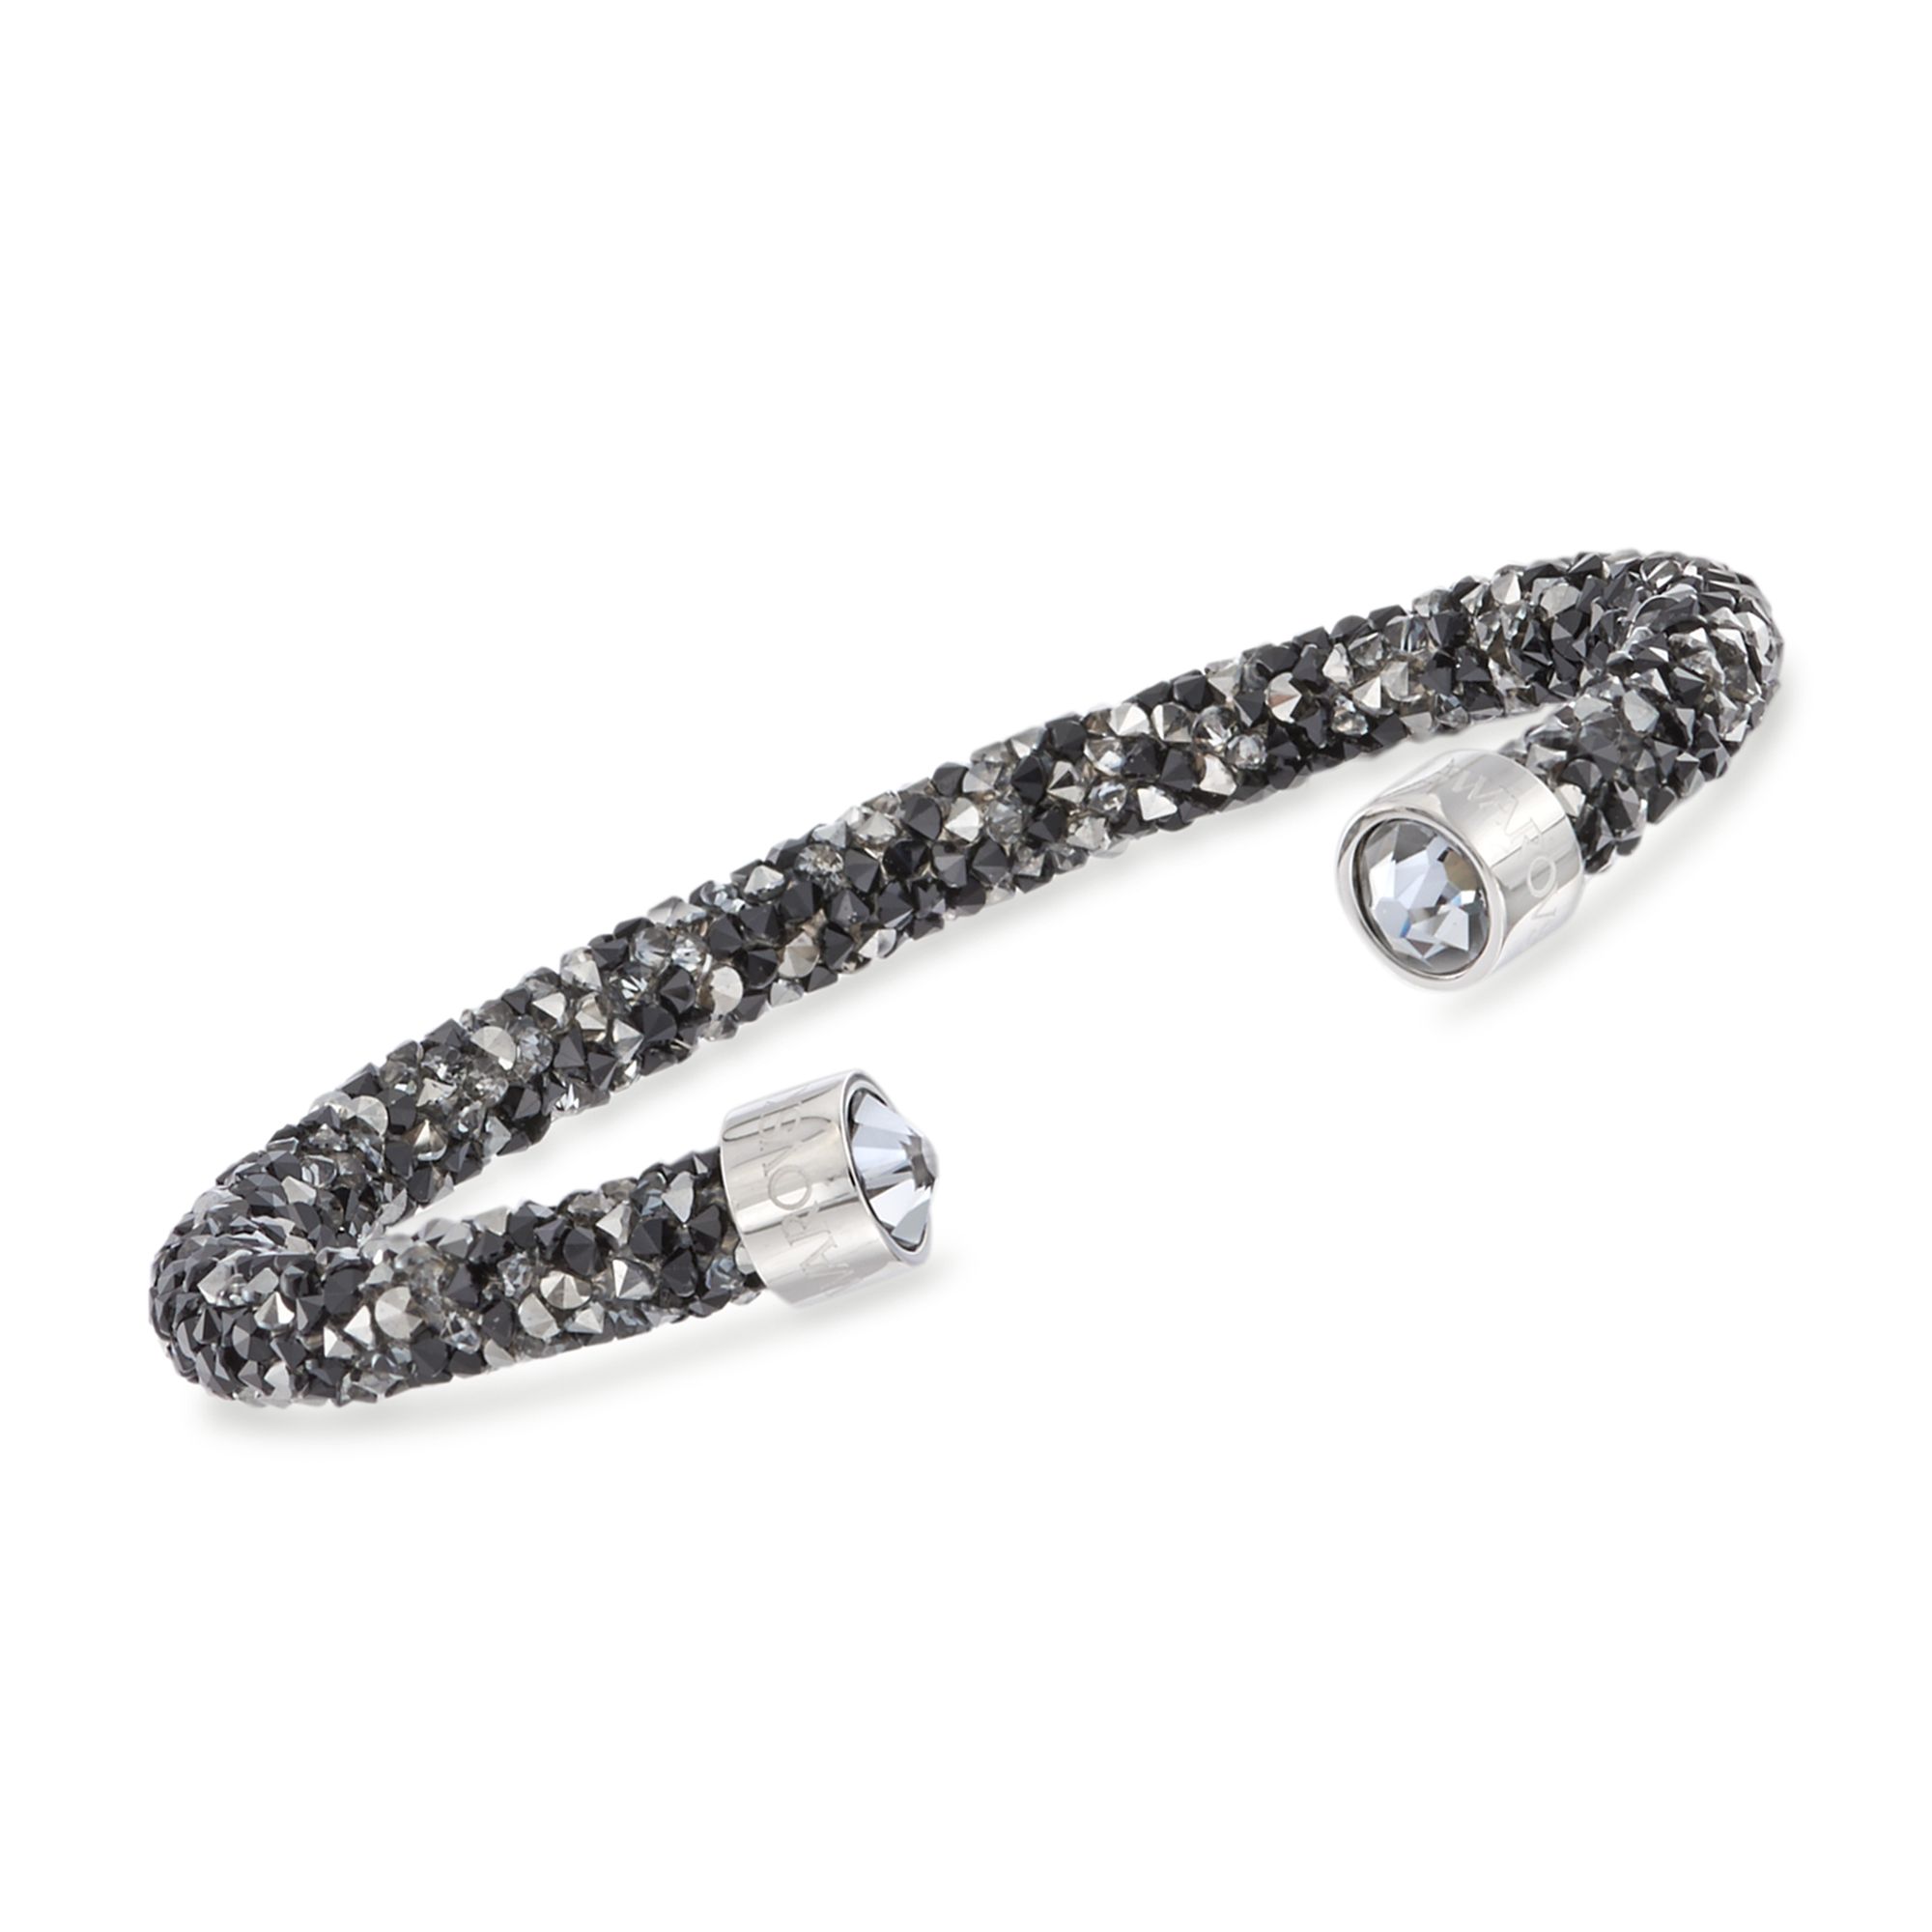 Swarovski Crystal "Dust" Black and Gray Crystal Cuff Bracelet in Stainless  Steel | Ross-Simons